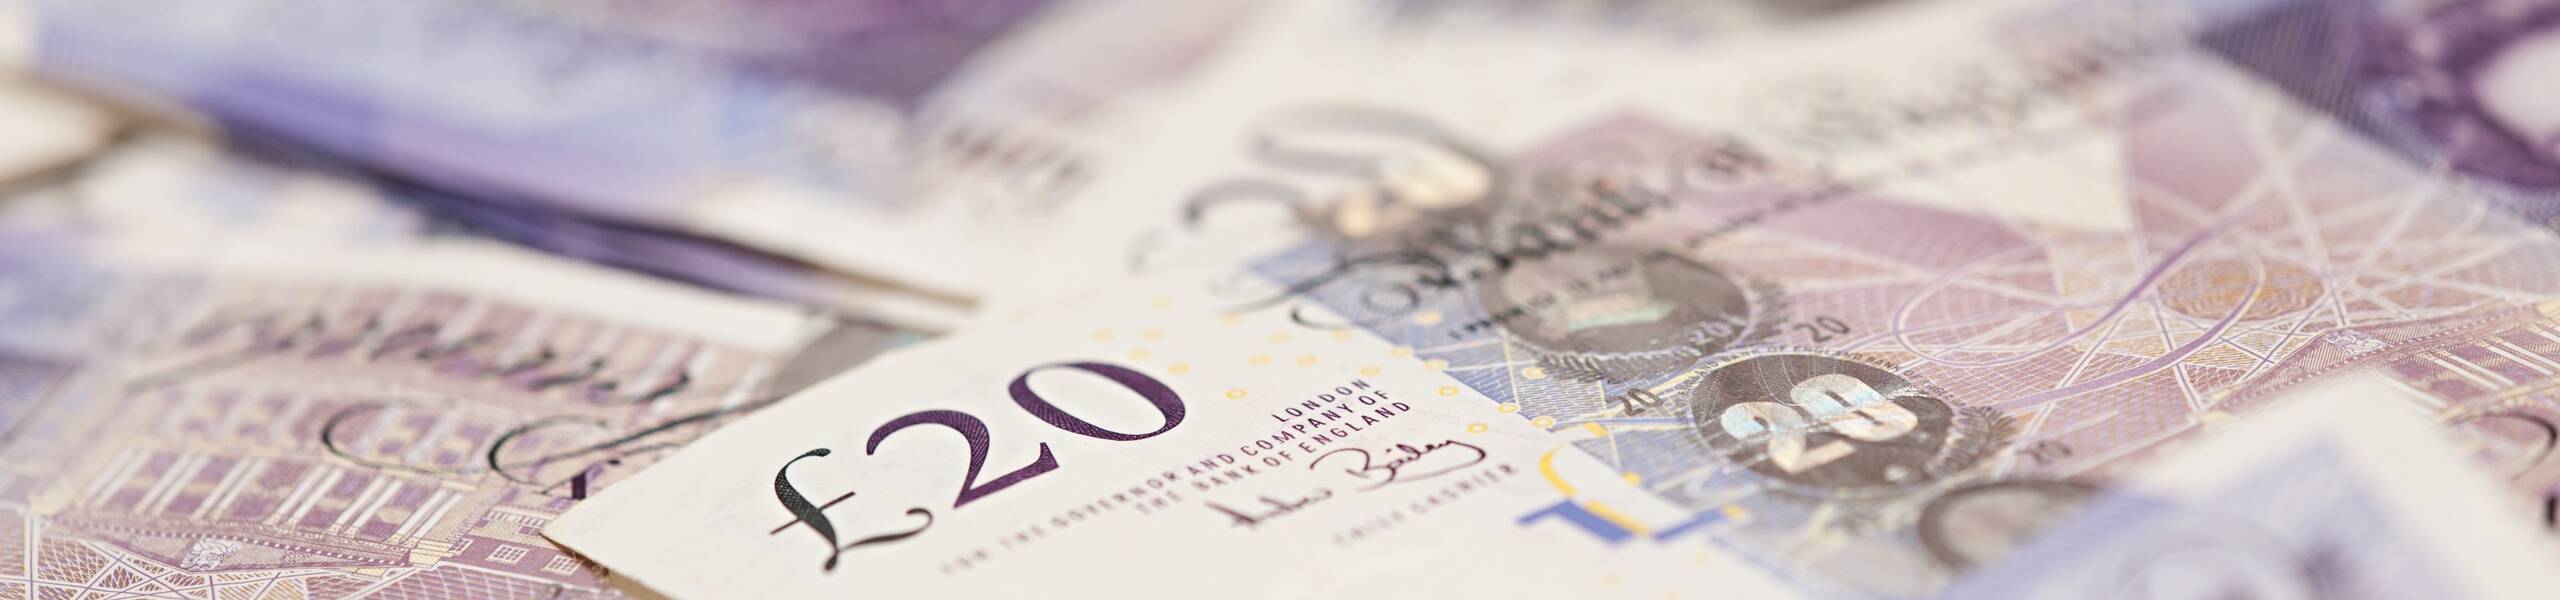 GBP/USD: 'V-Top' led to consolidation